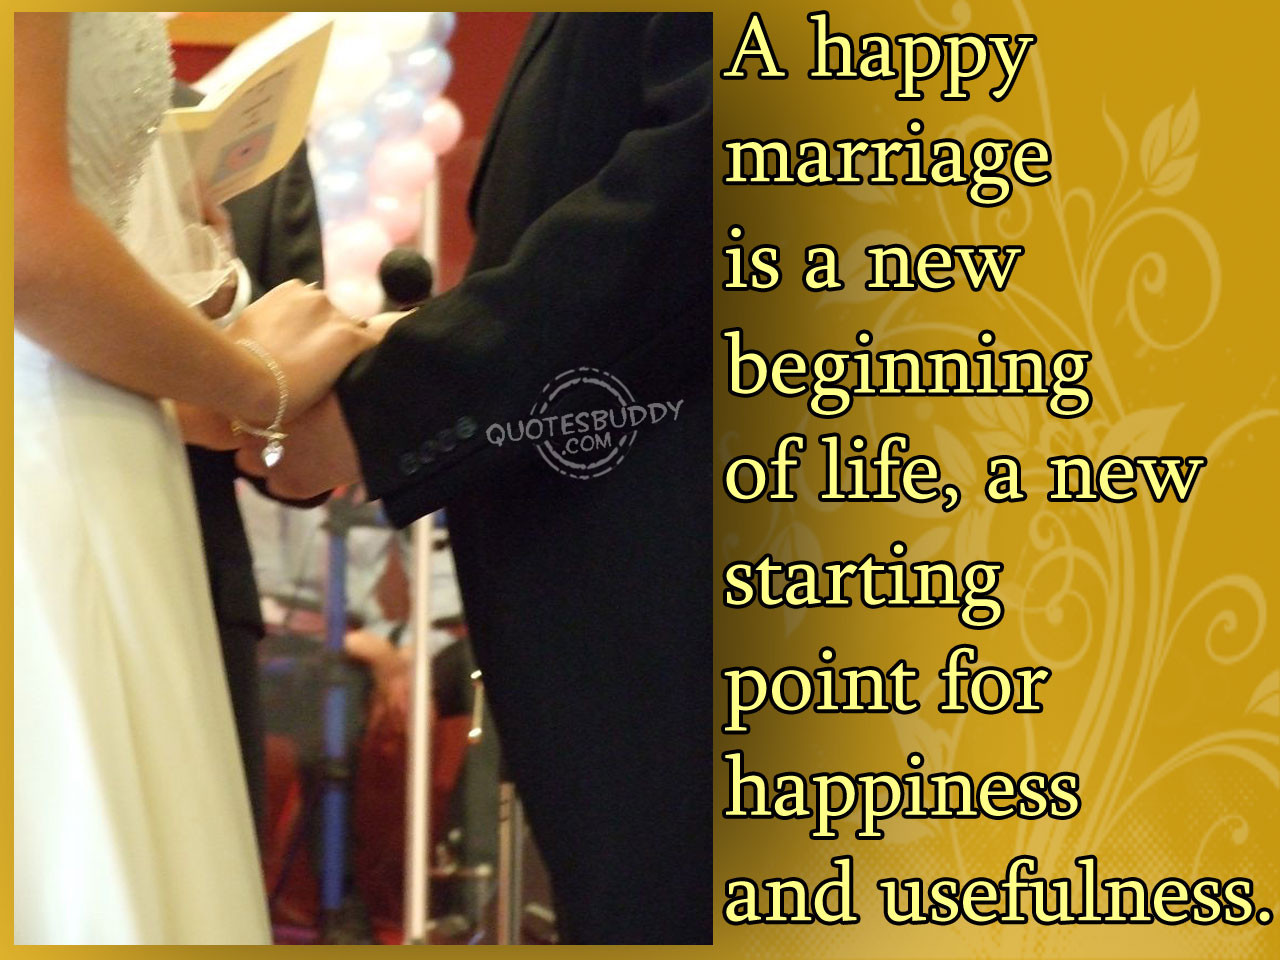 Marriage Pic Quotes
 Funny Quotes About Marriage QuotesGram